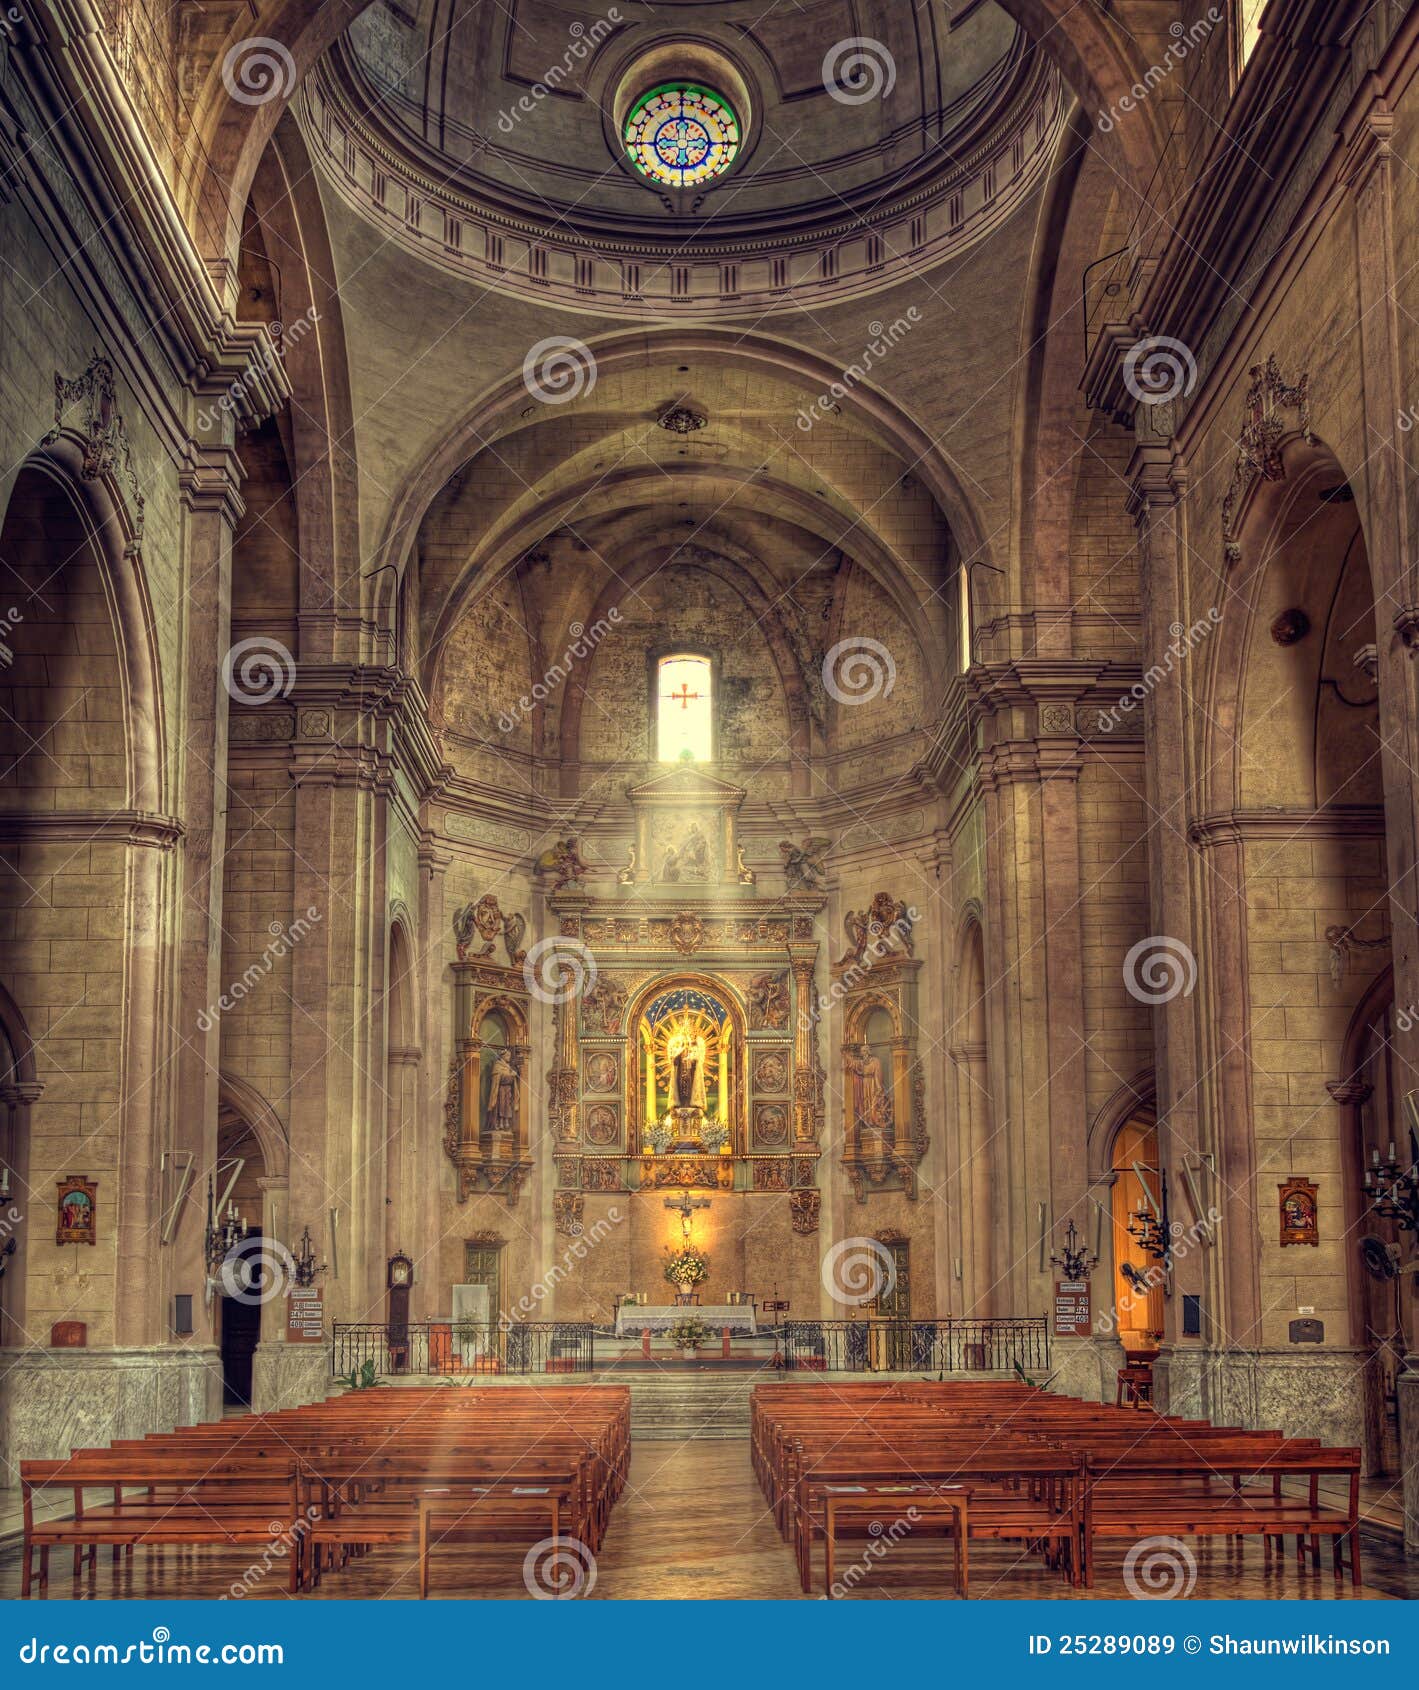 Mahon cathedral interior editorial stock image. Image of historic - 25289089